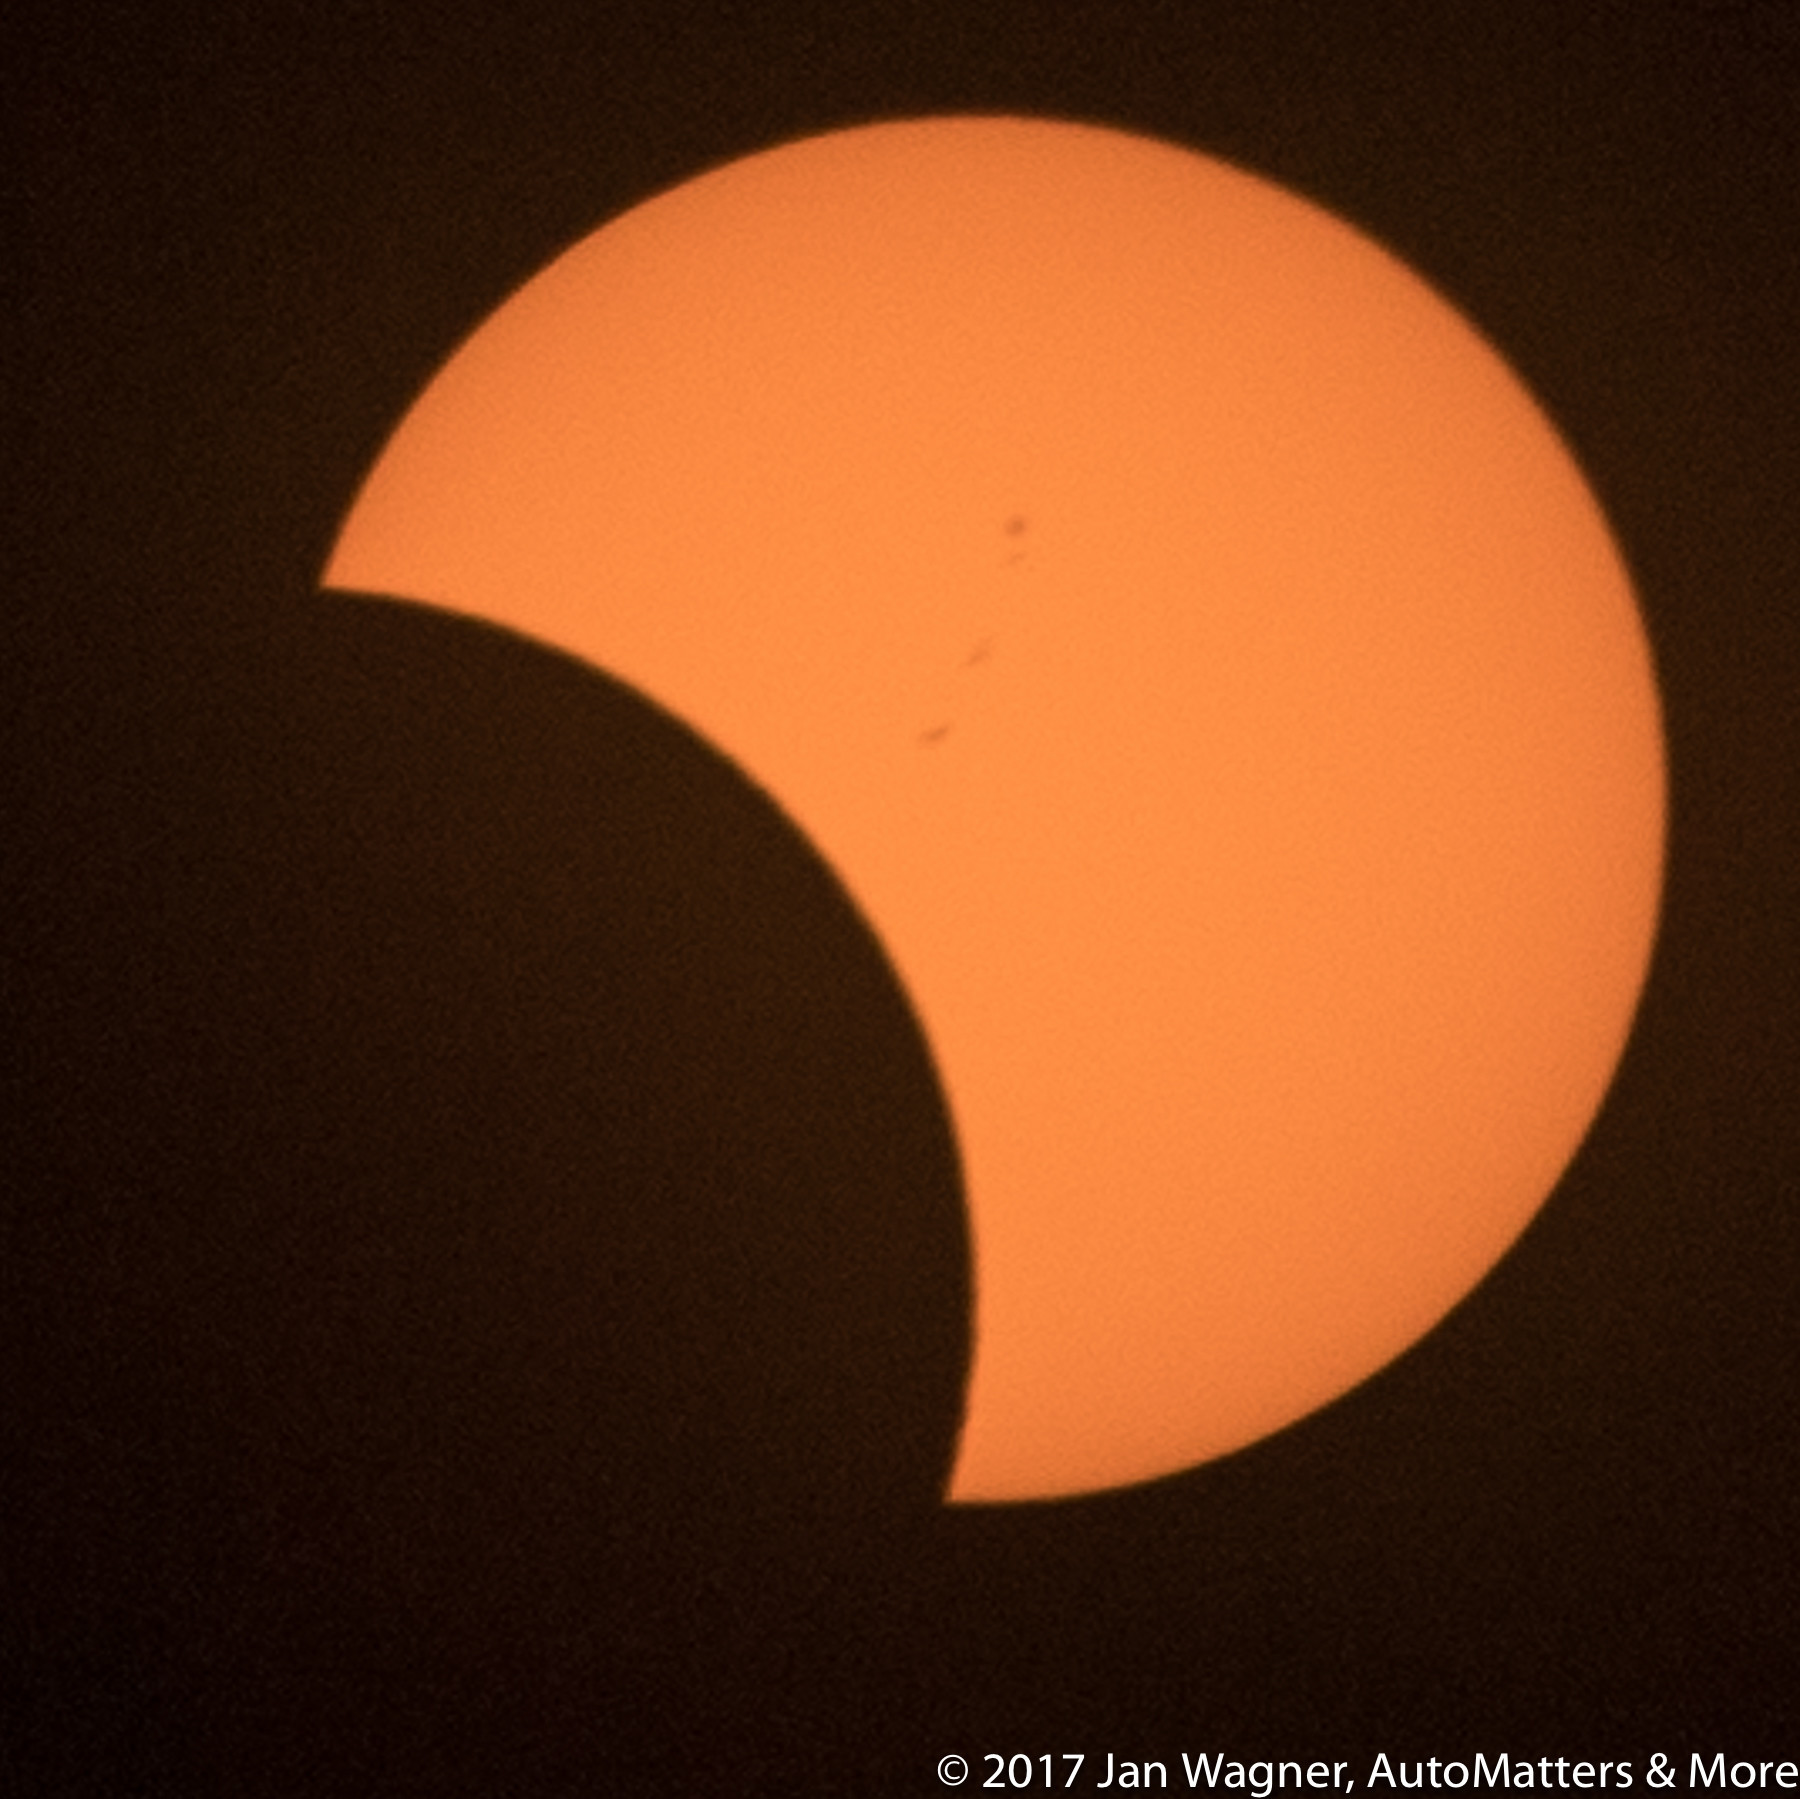 Partial solar eclipse with sunspots